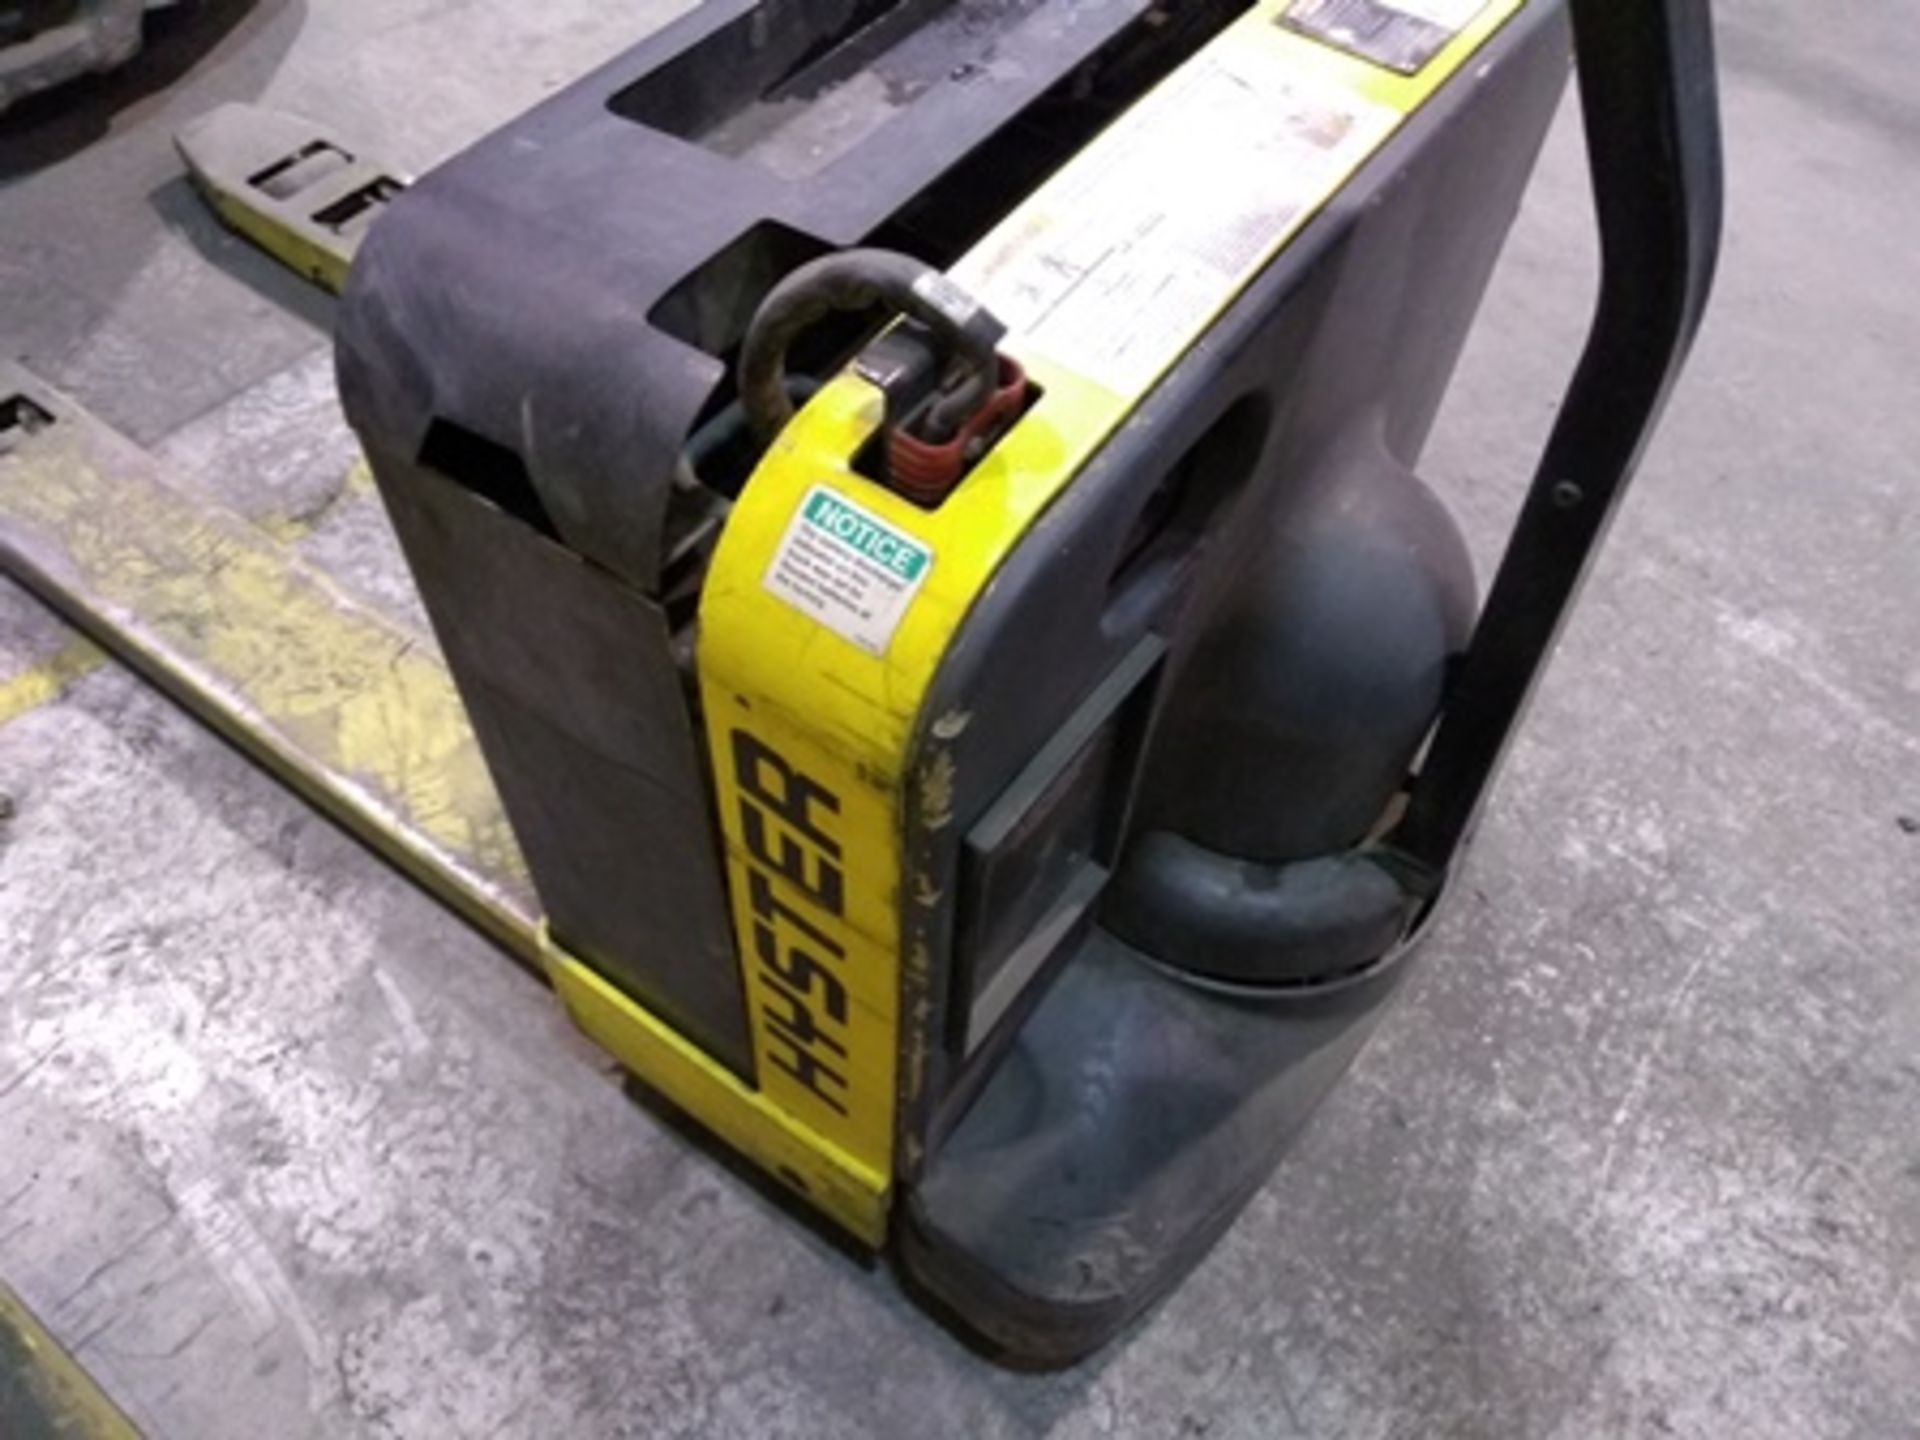 Hyster Electric Pallet Jack, model W40z, max load 4,000 pounds, built-in charger and 24V battery - Image 8 of 17